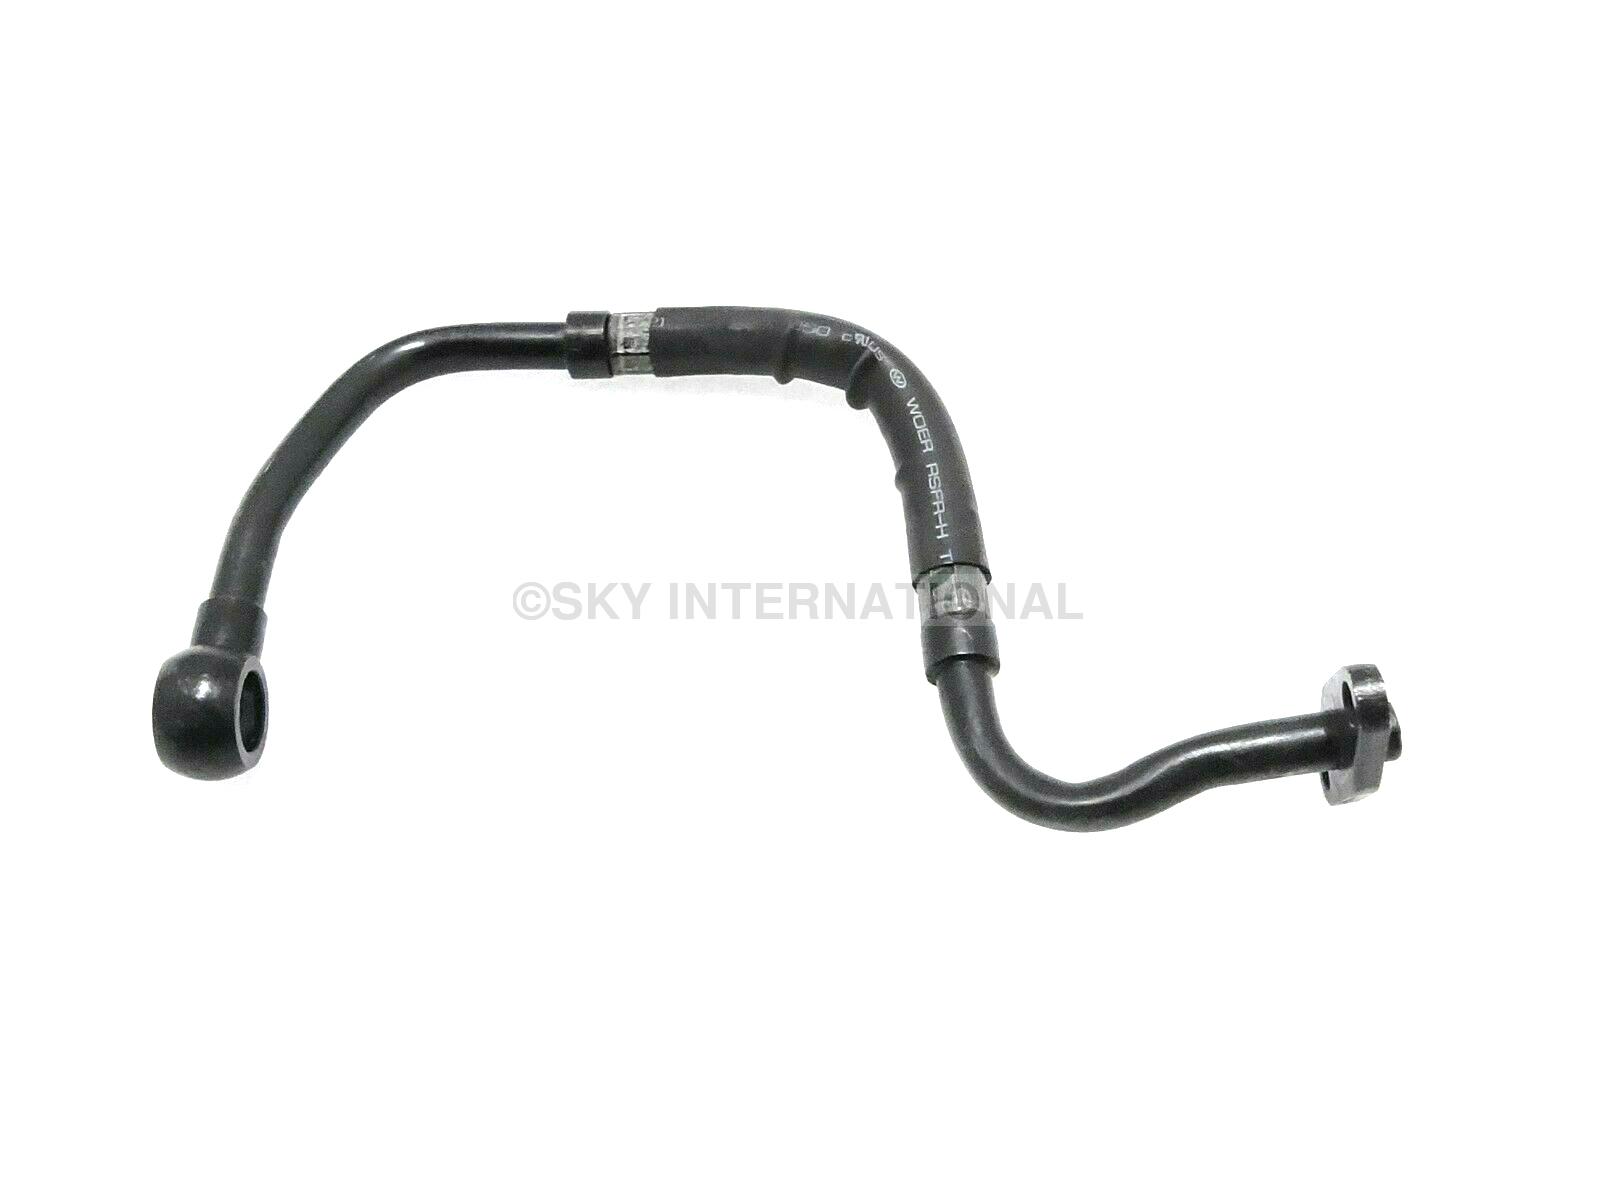 Engine Oil Compressor Pipe Fit For Royal Enfield Himalayan ...